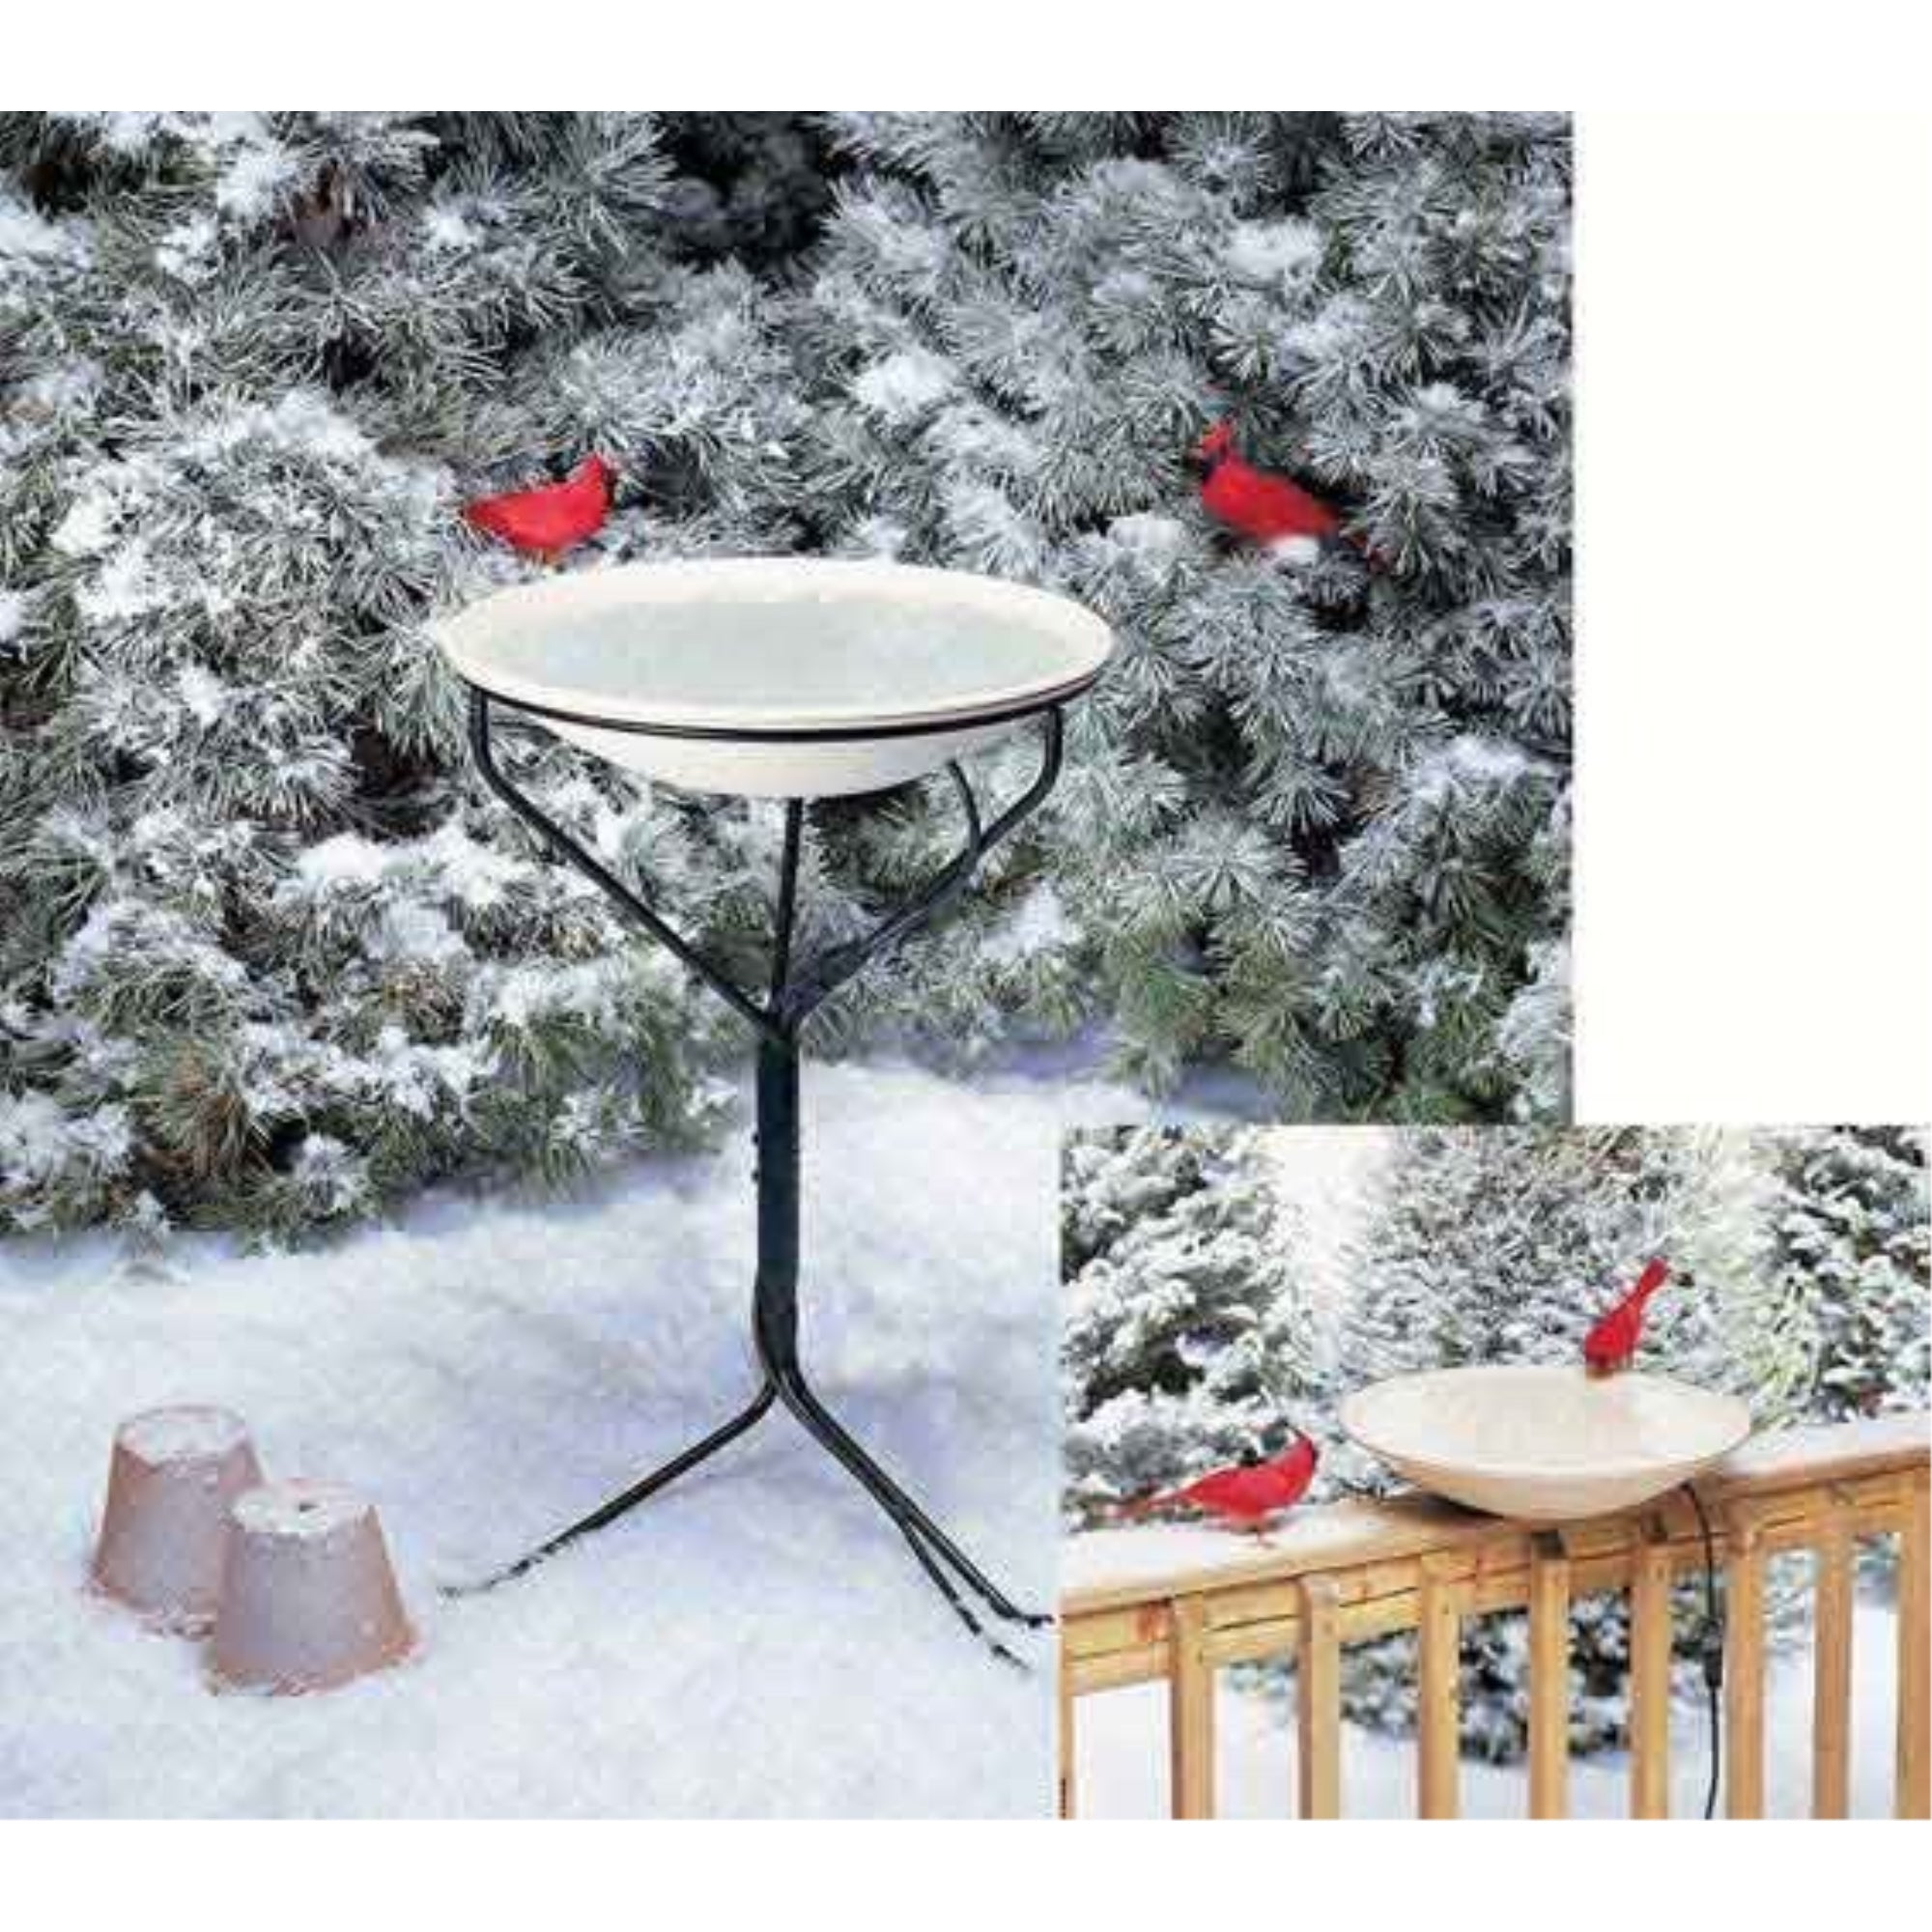 API Heated Bird Bath with Metal Stand, White Basin with Black Stand, 20”